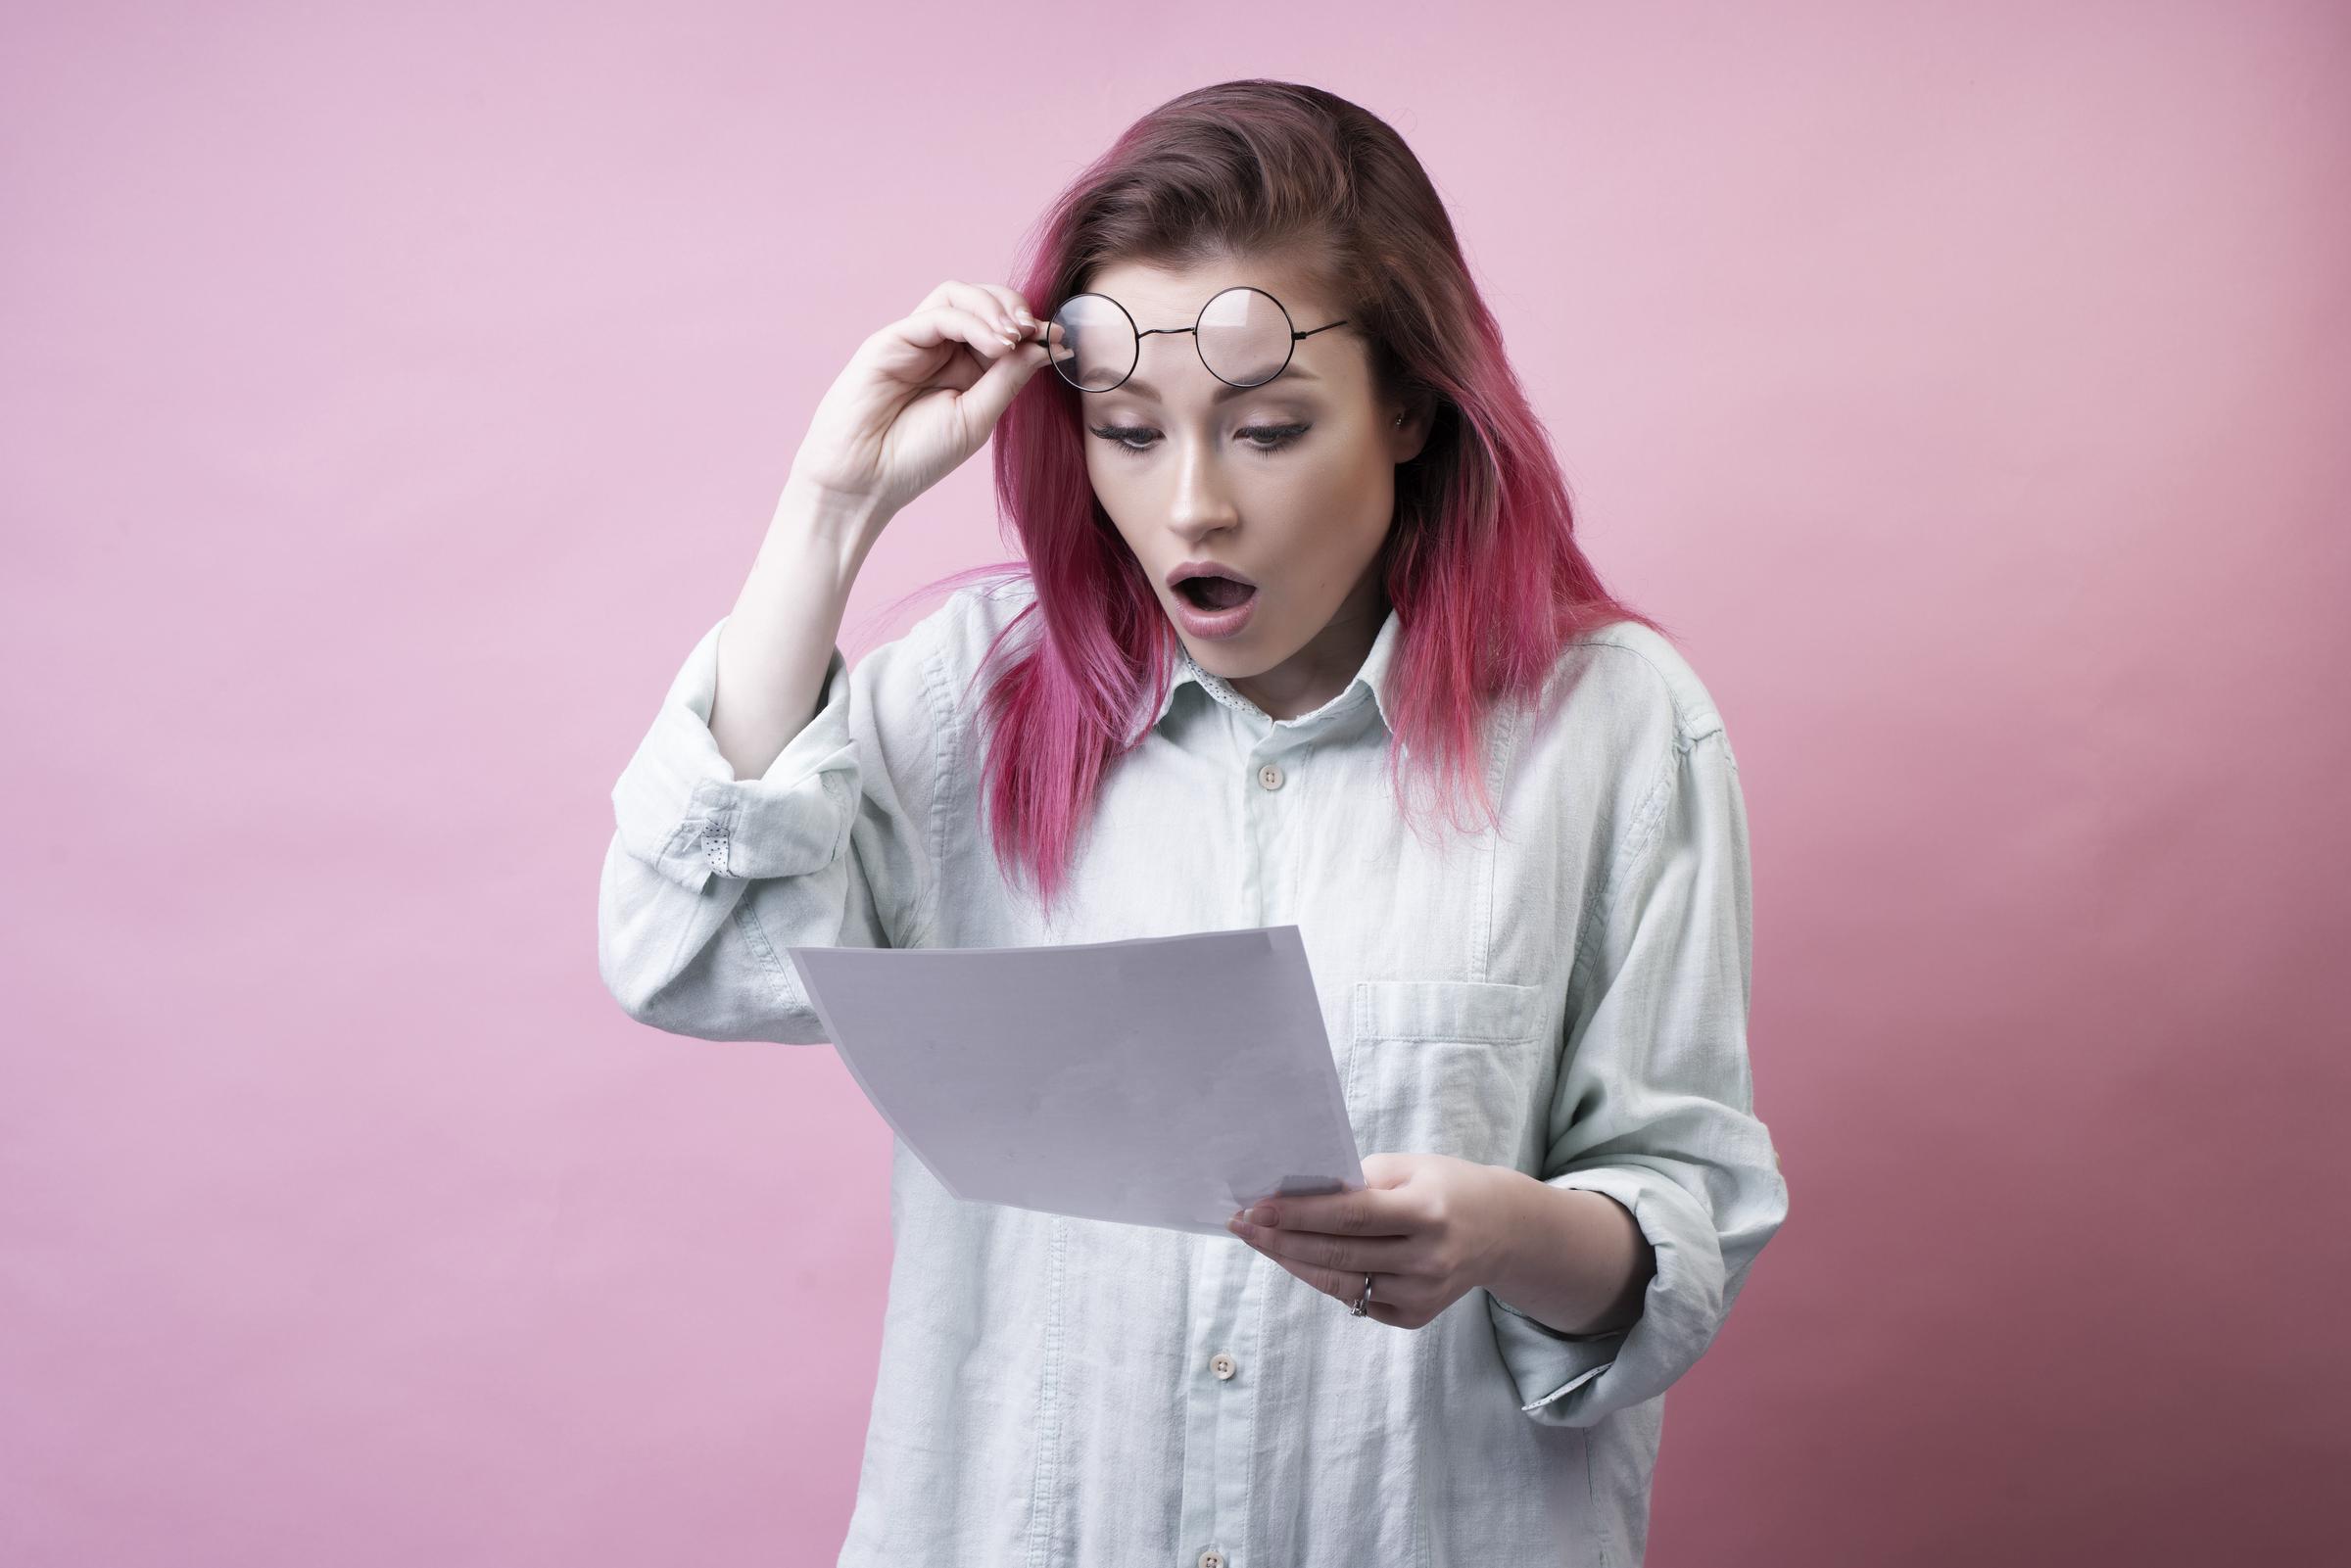 Shocked girl with glasses and paper | Source: Freepik